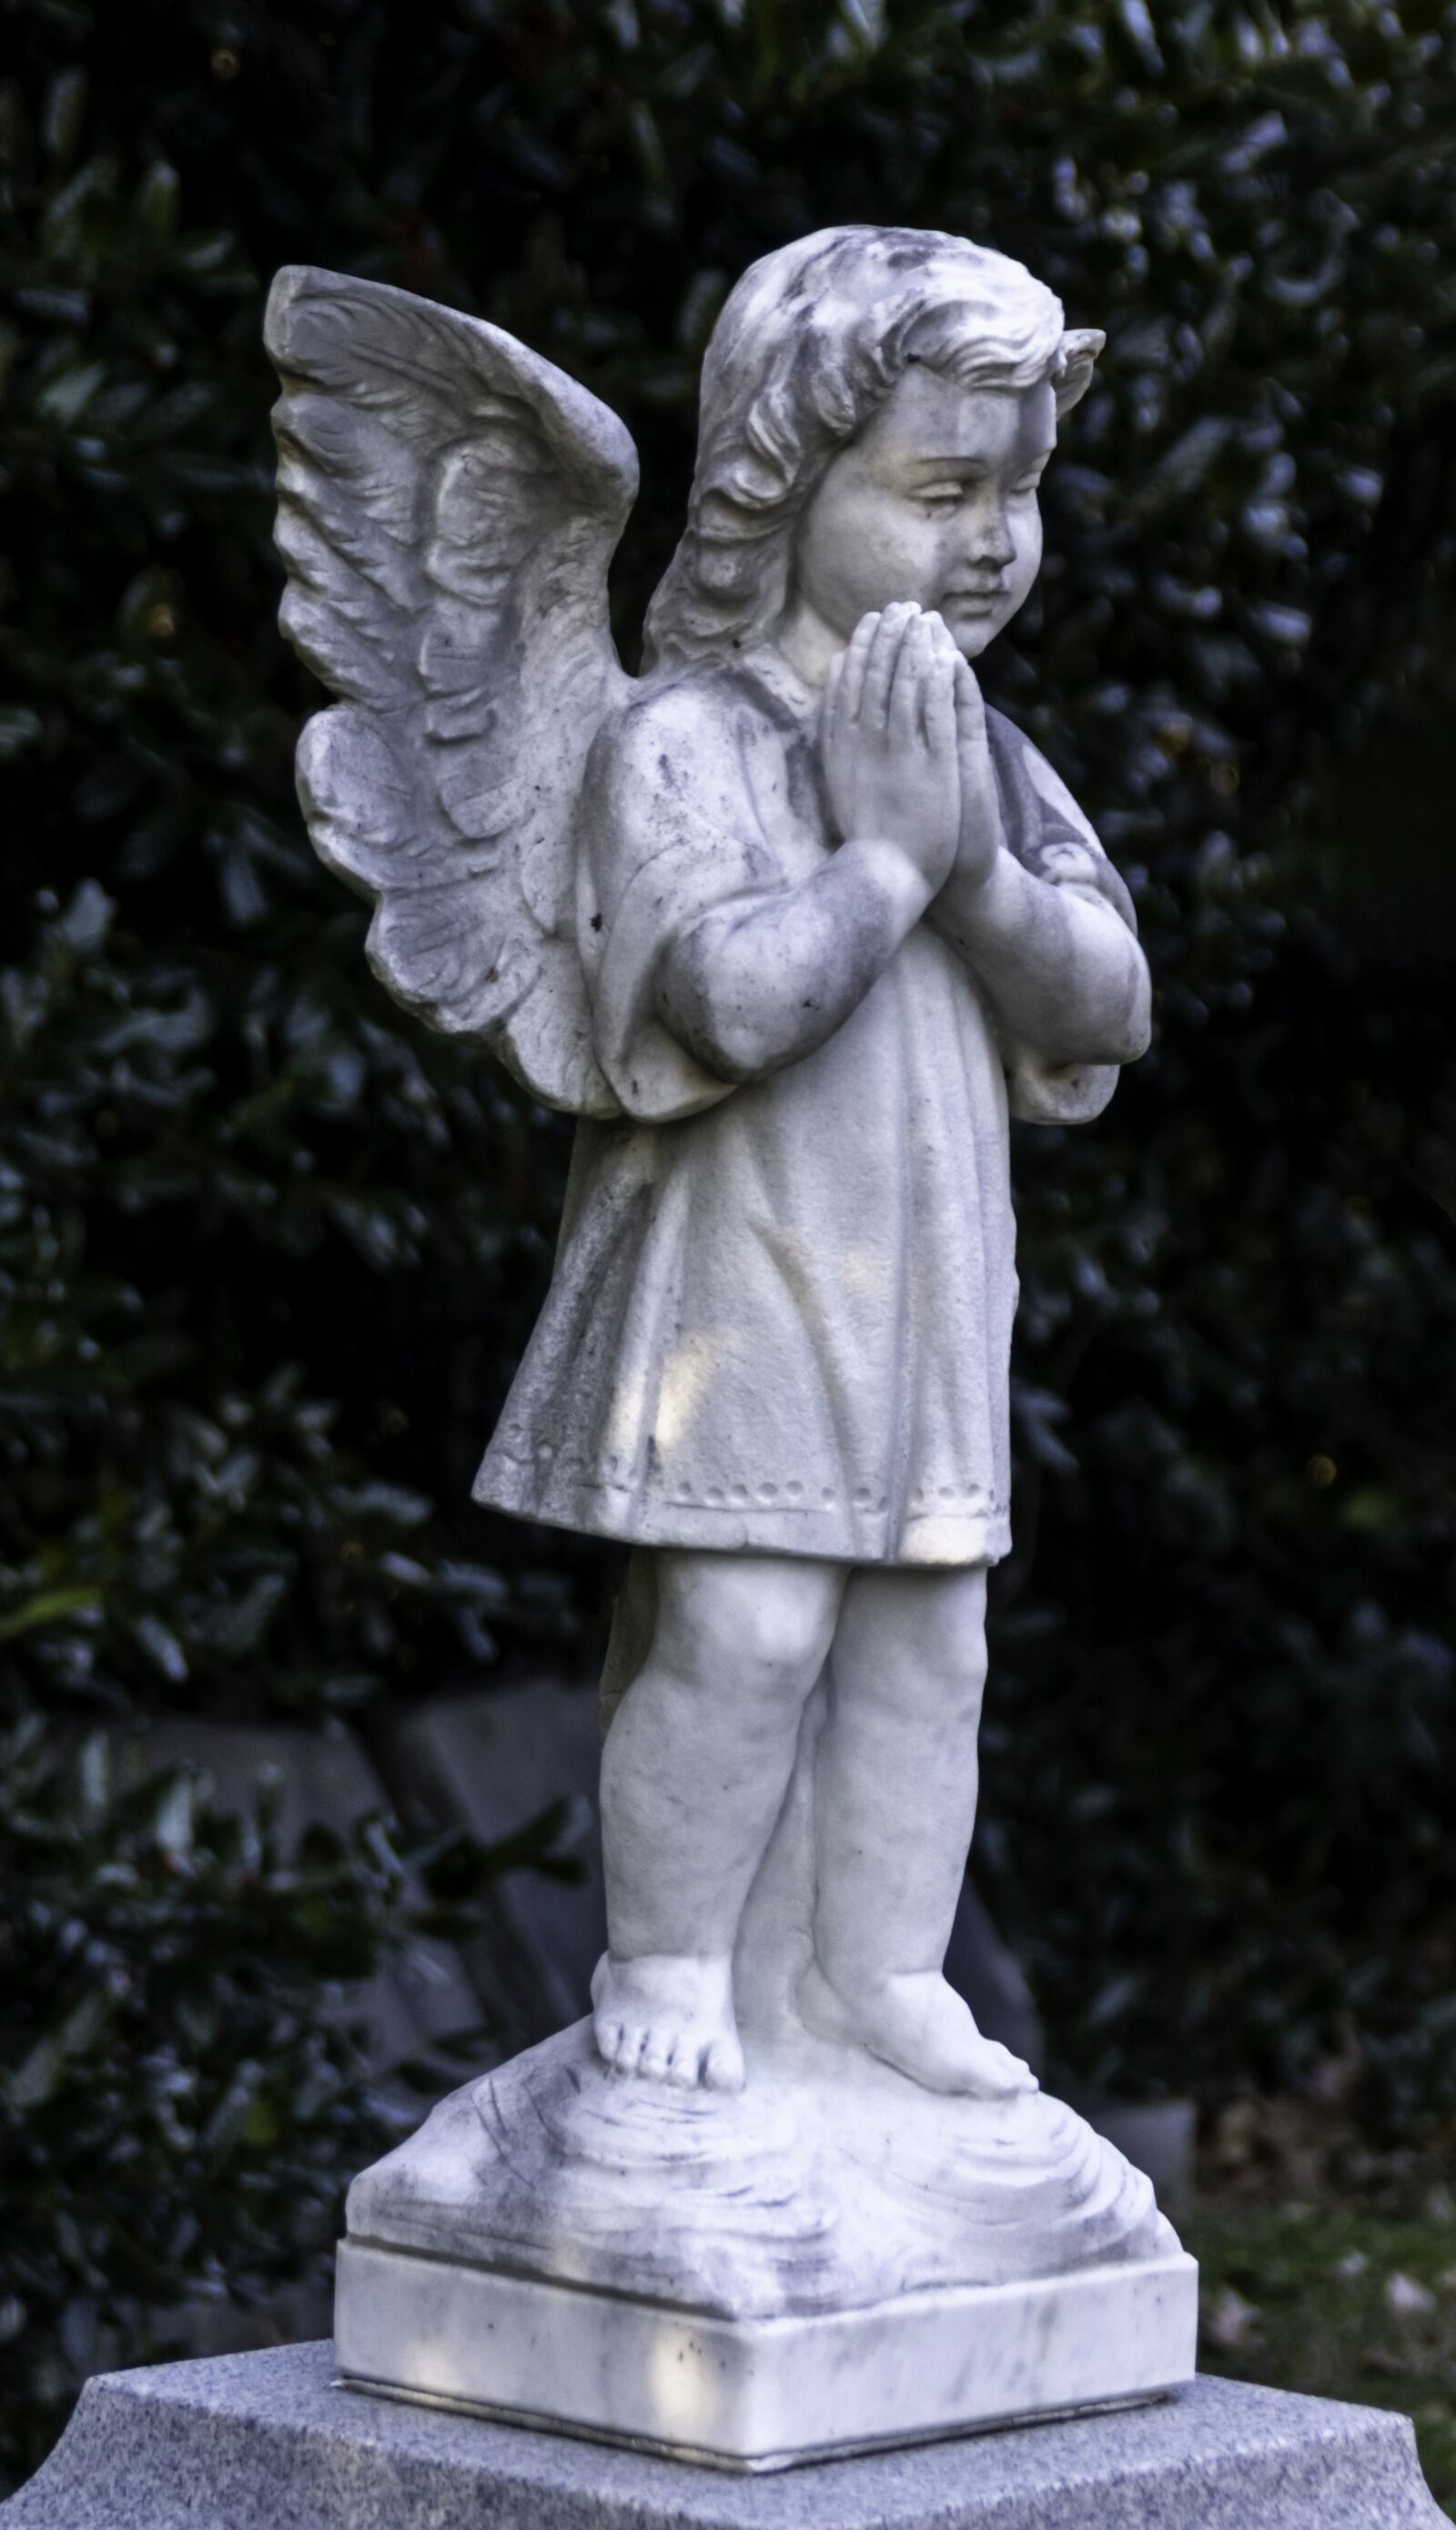 Sony SLT-A77 + Sony DT 18-200mm F3.5-6.3 sample photo. Angel, cemetery, monument photography